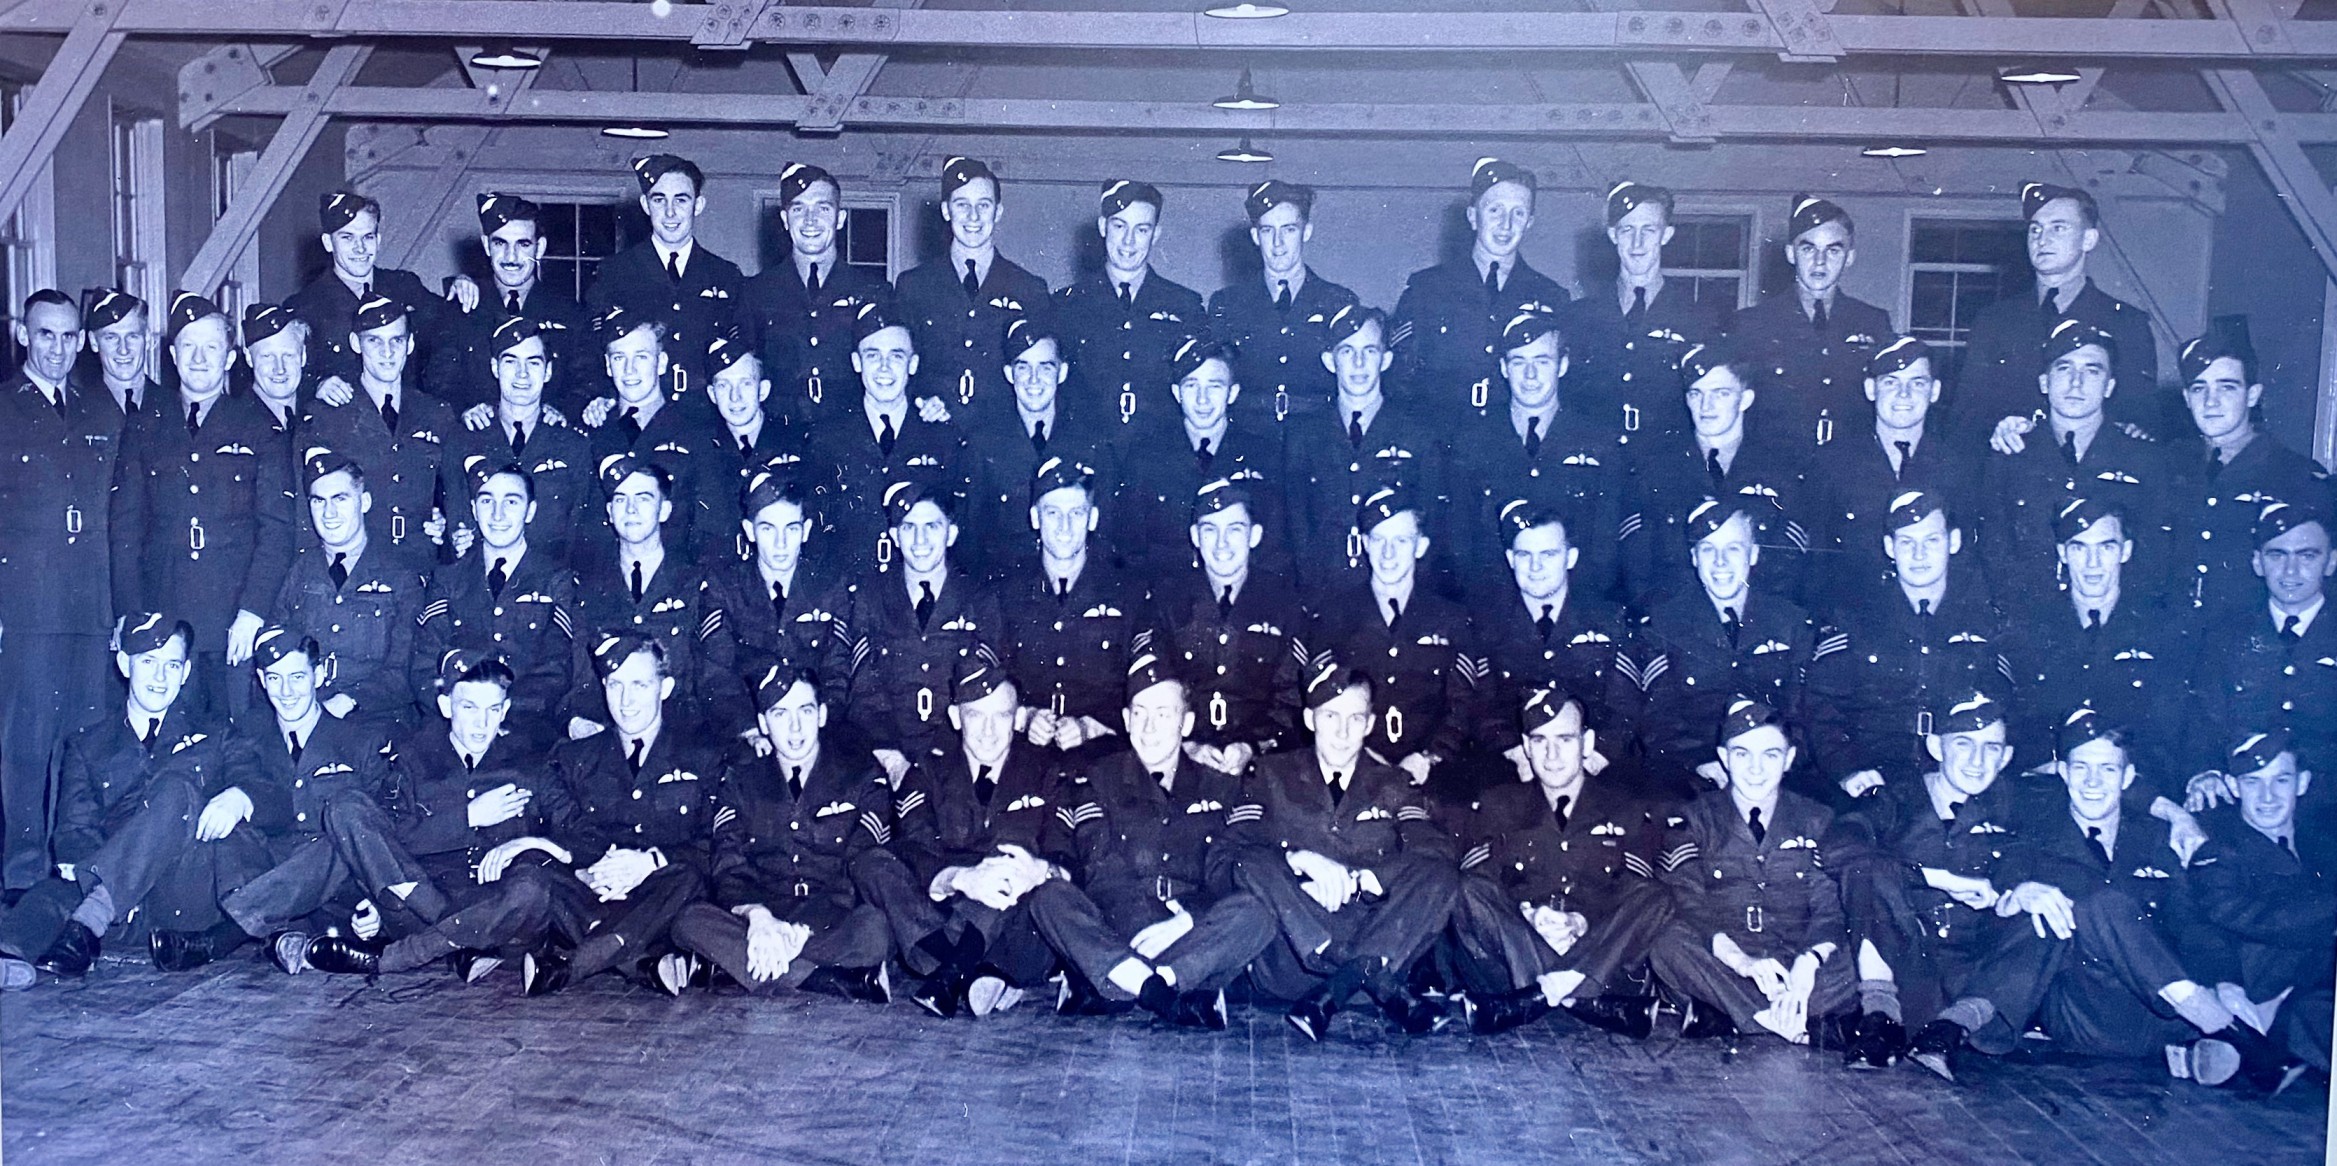 Military uniformed men sitting and standing together for a picture to be taken